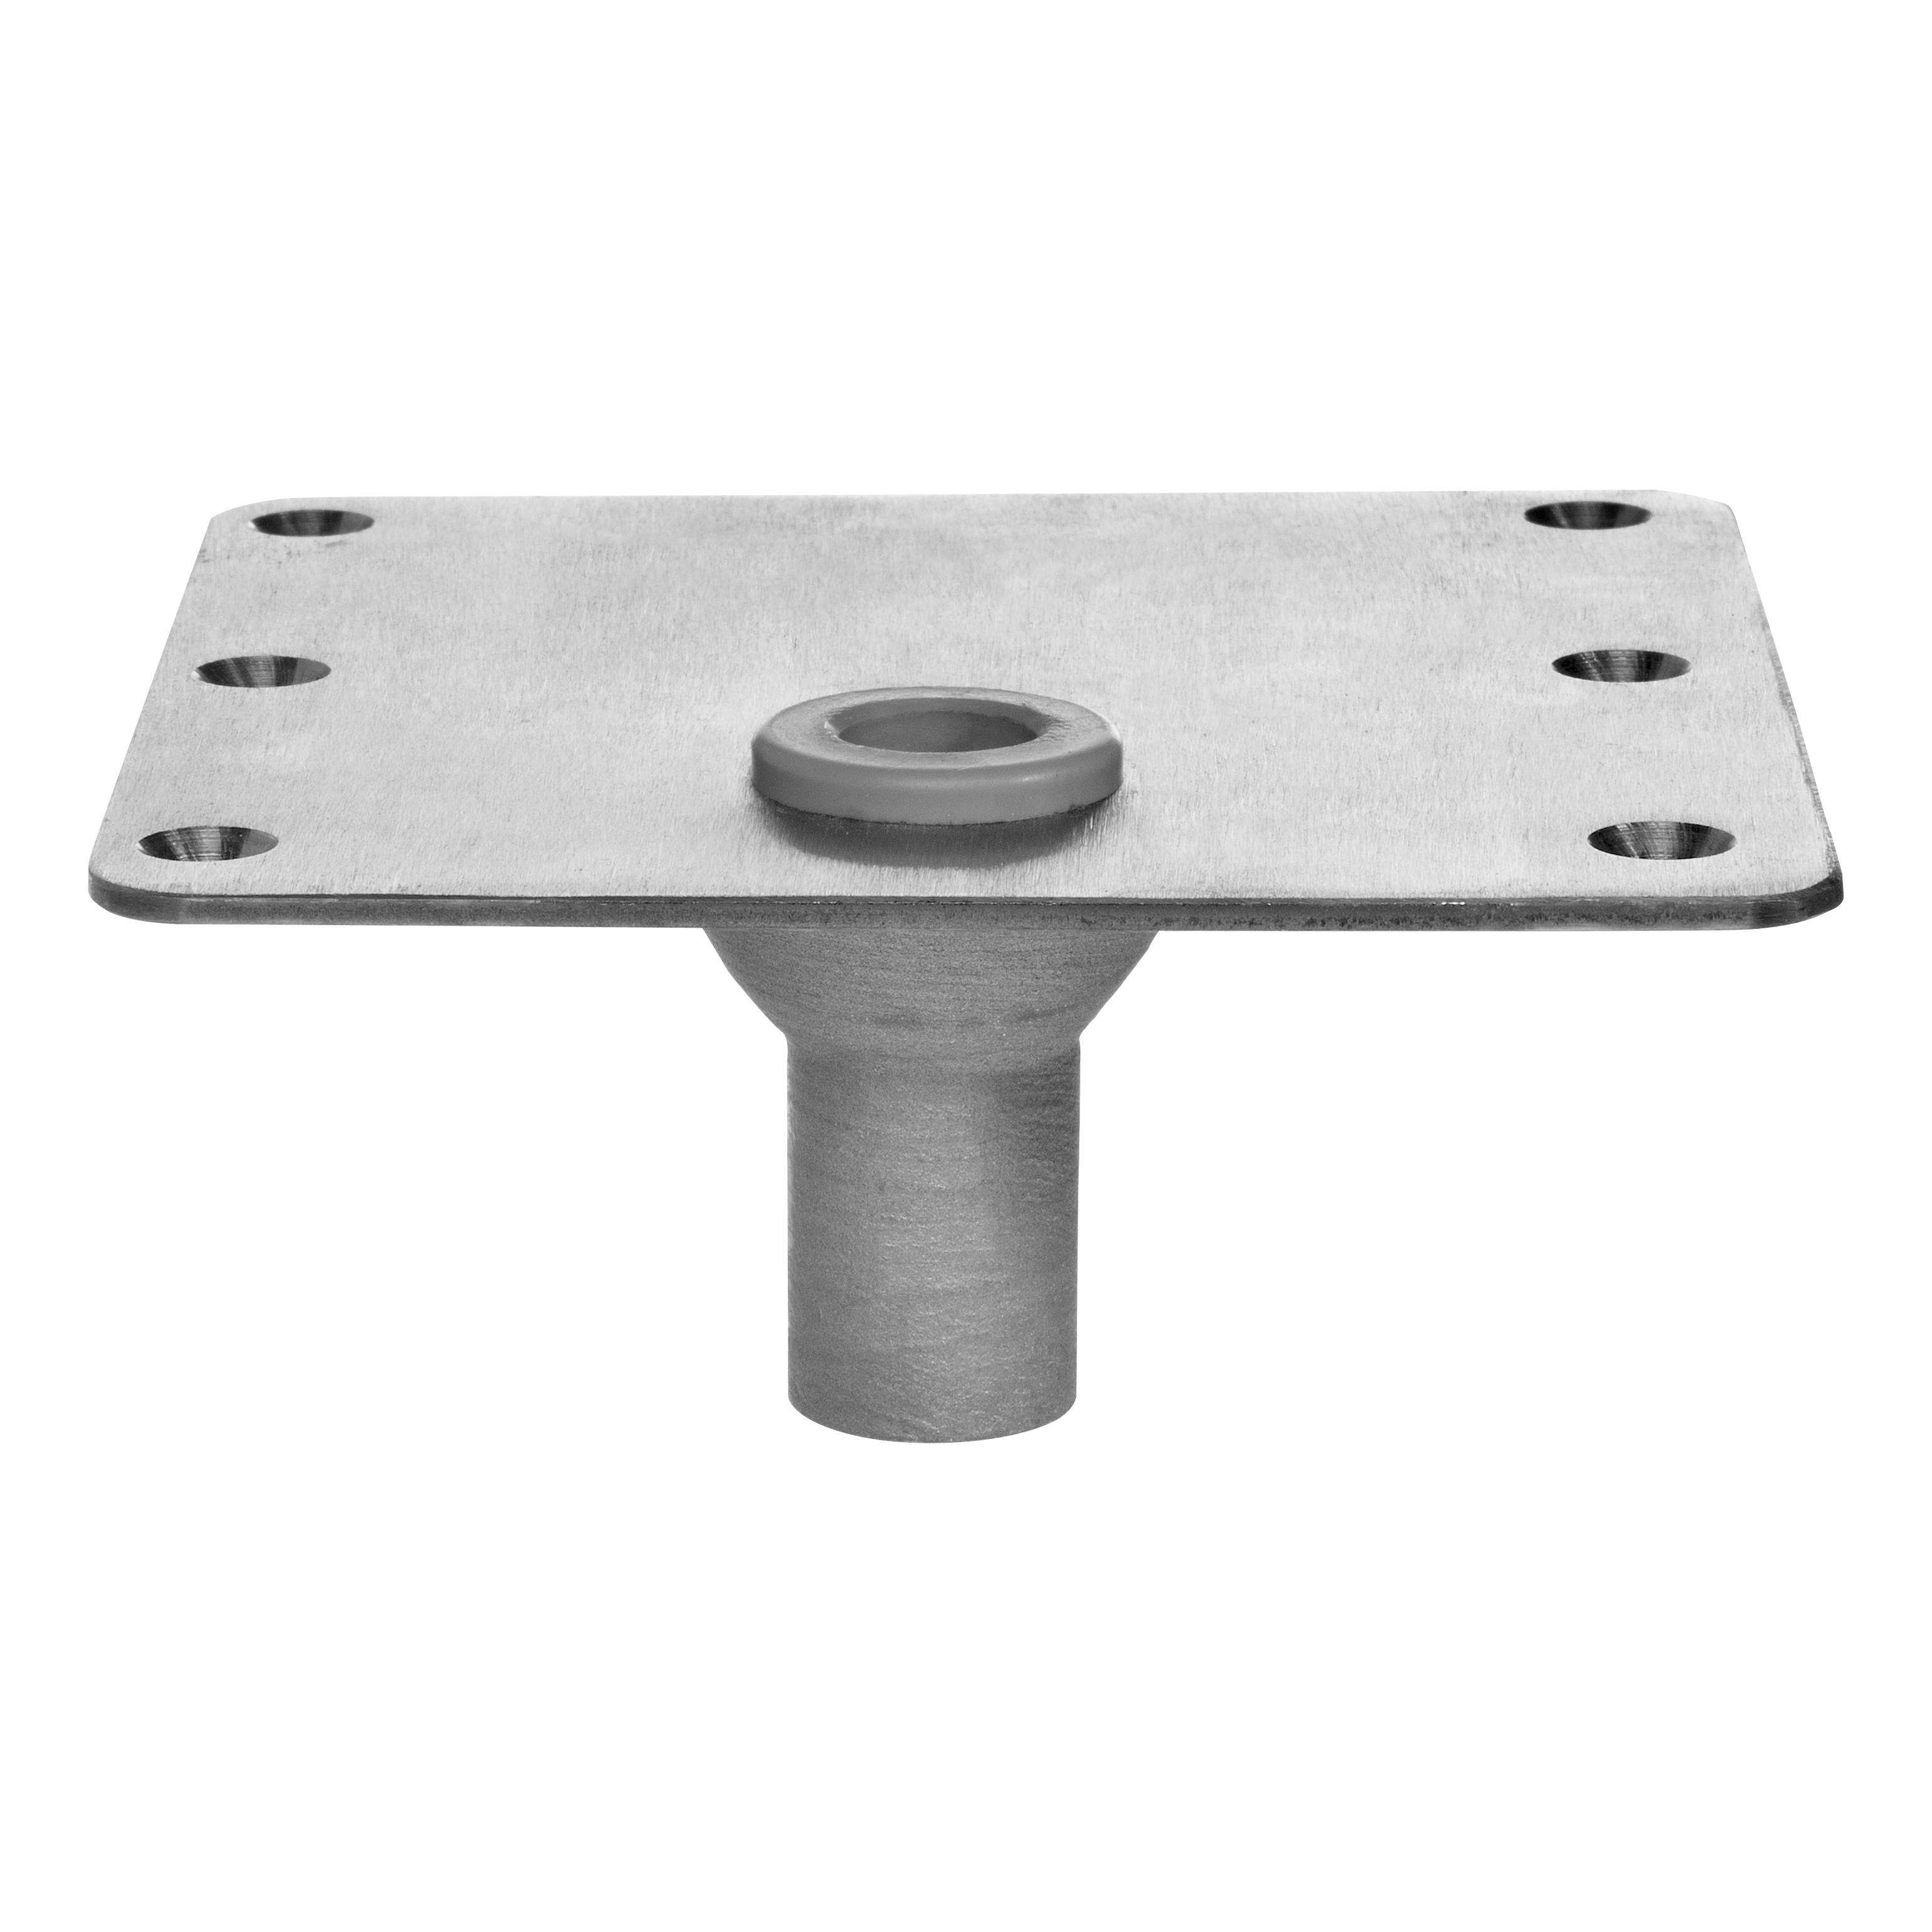 Bass Pro Shops® Kwik Connect Pedestal Deck Plate with Offset Hole - Side View